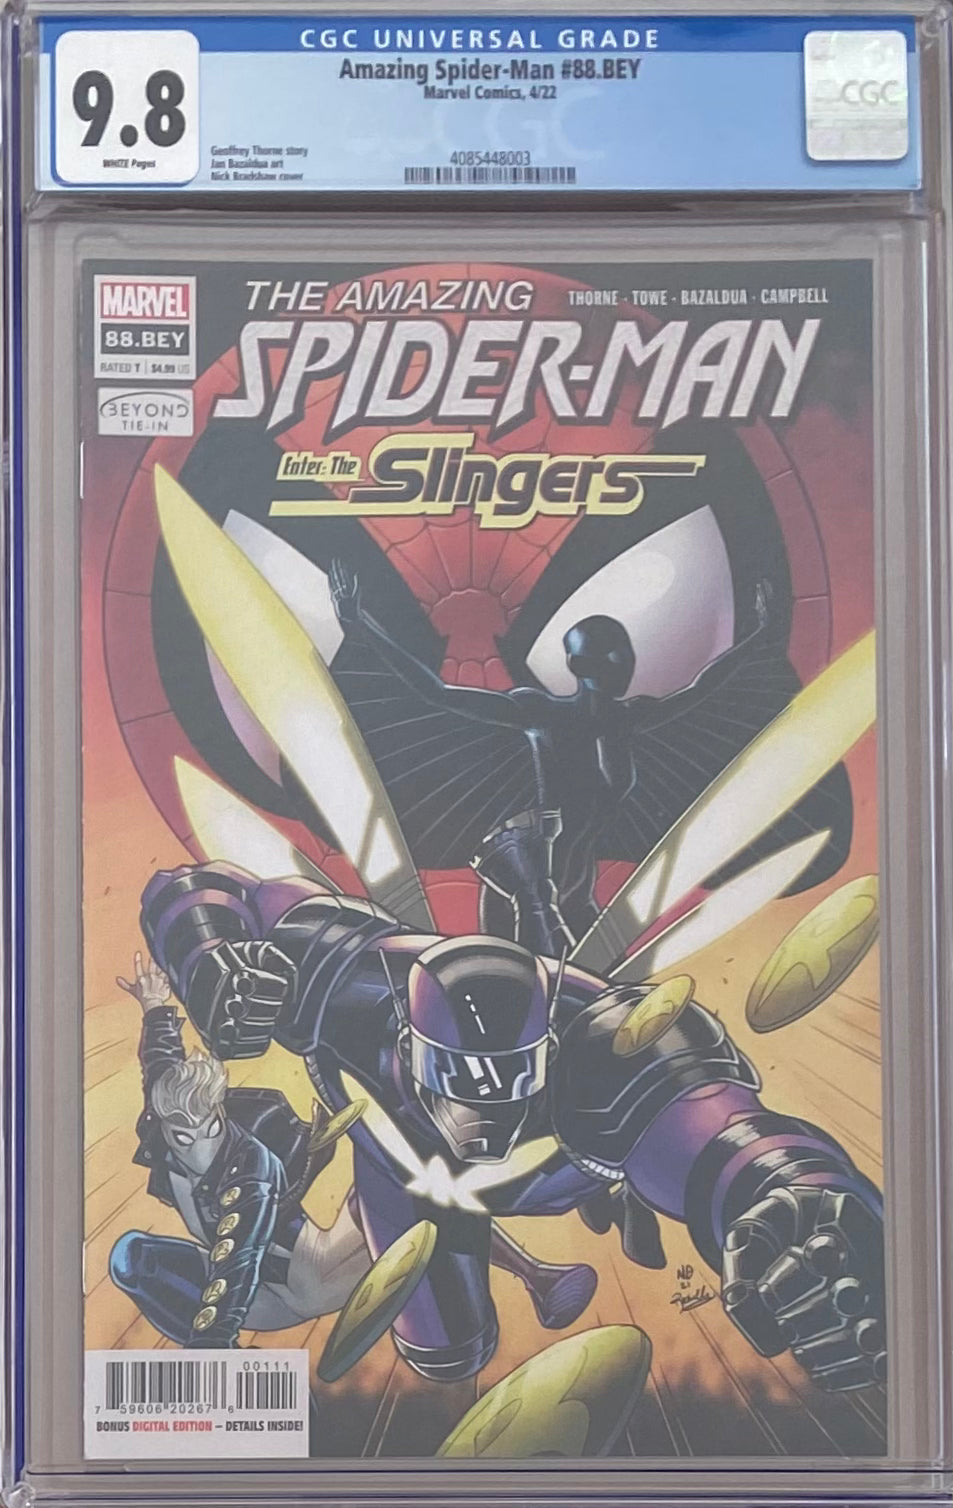 Amazing Spider-Man #88.BEY CGC 9.8 - First Appearance Slingers